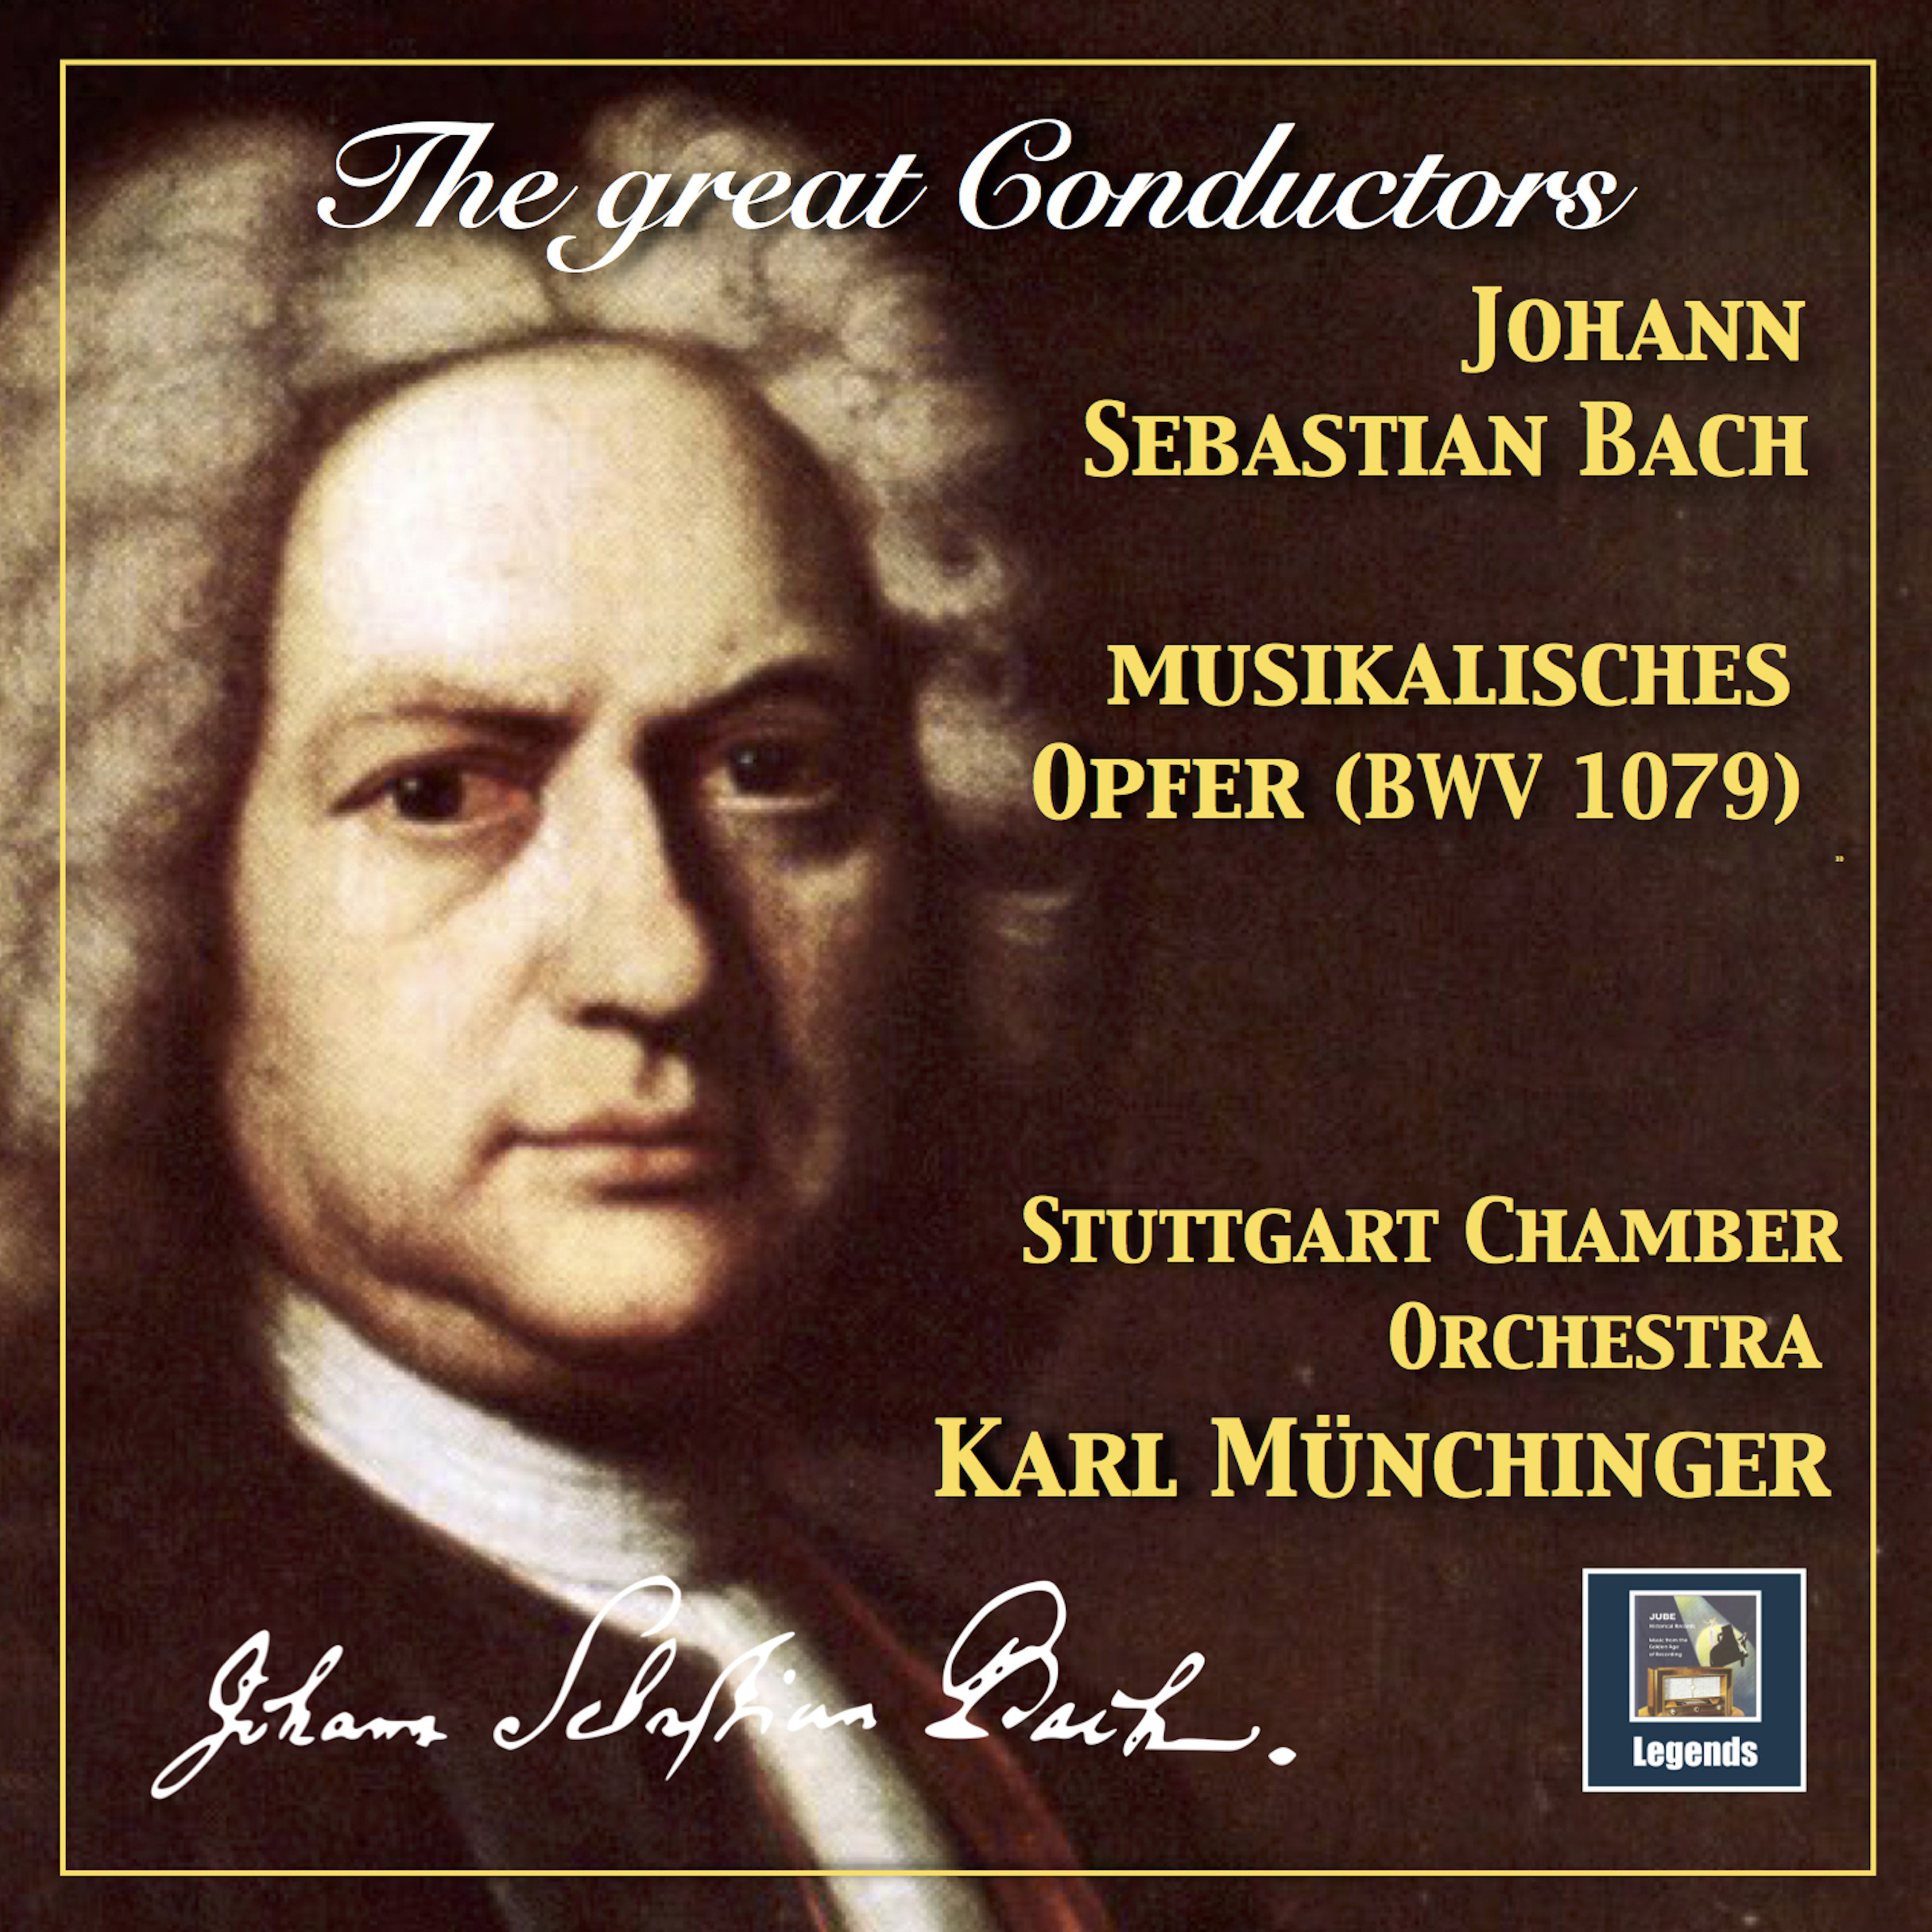 Musikalisches Opfer, BWV 1079 (Arr. K. Münchinger for Chamber Orchestra): Canon à 2 per augmentationem, contrario motu